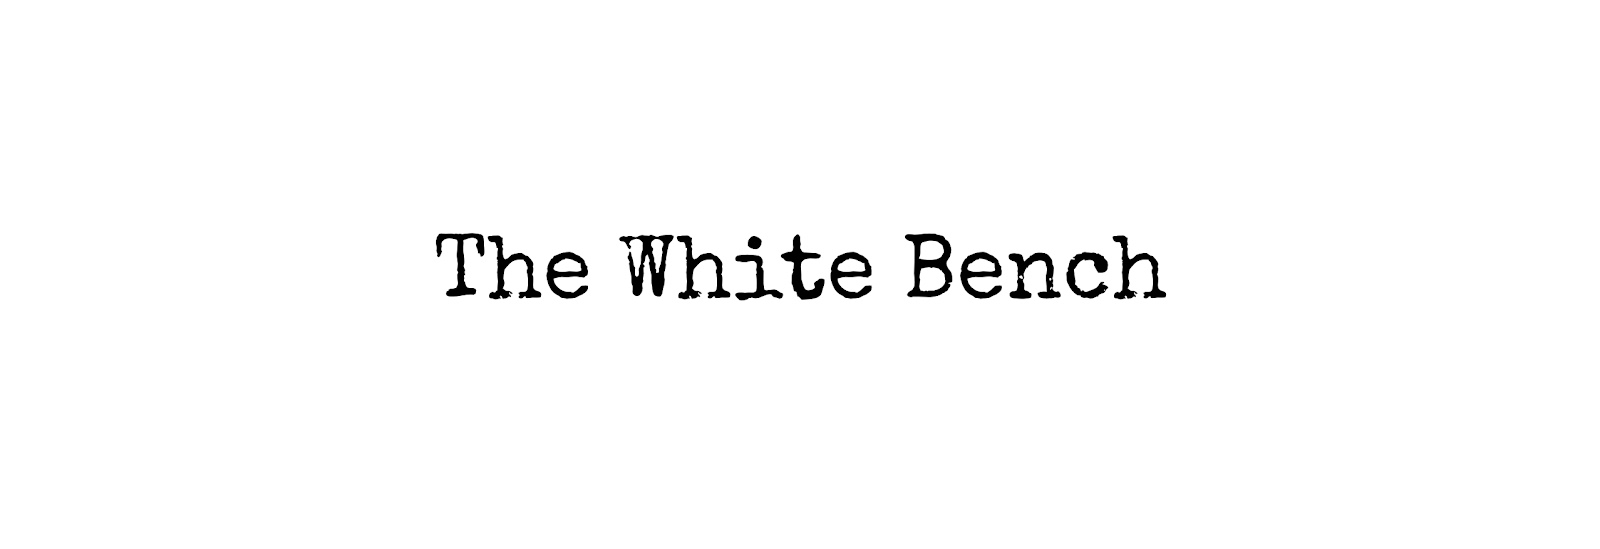 The White Bench